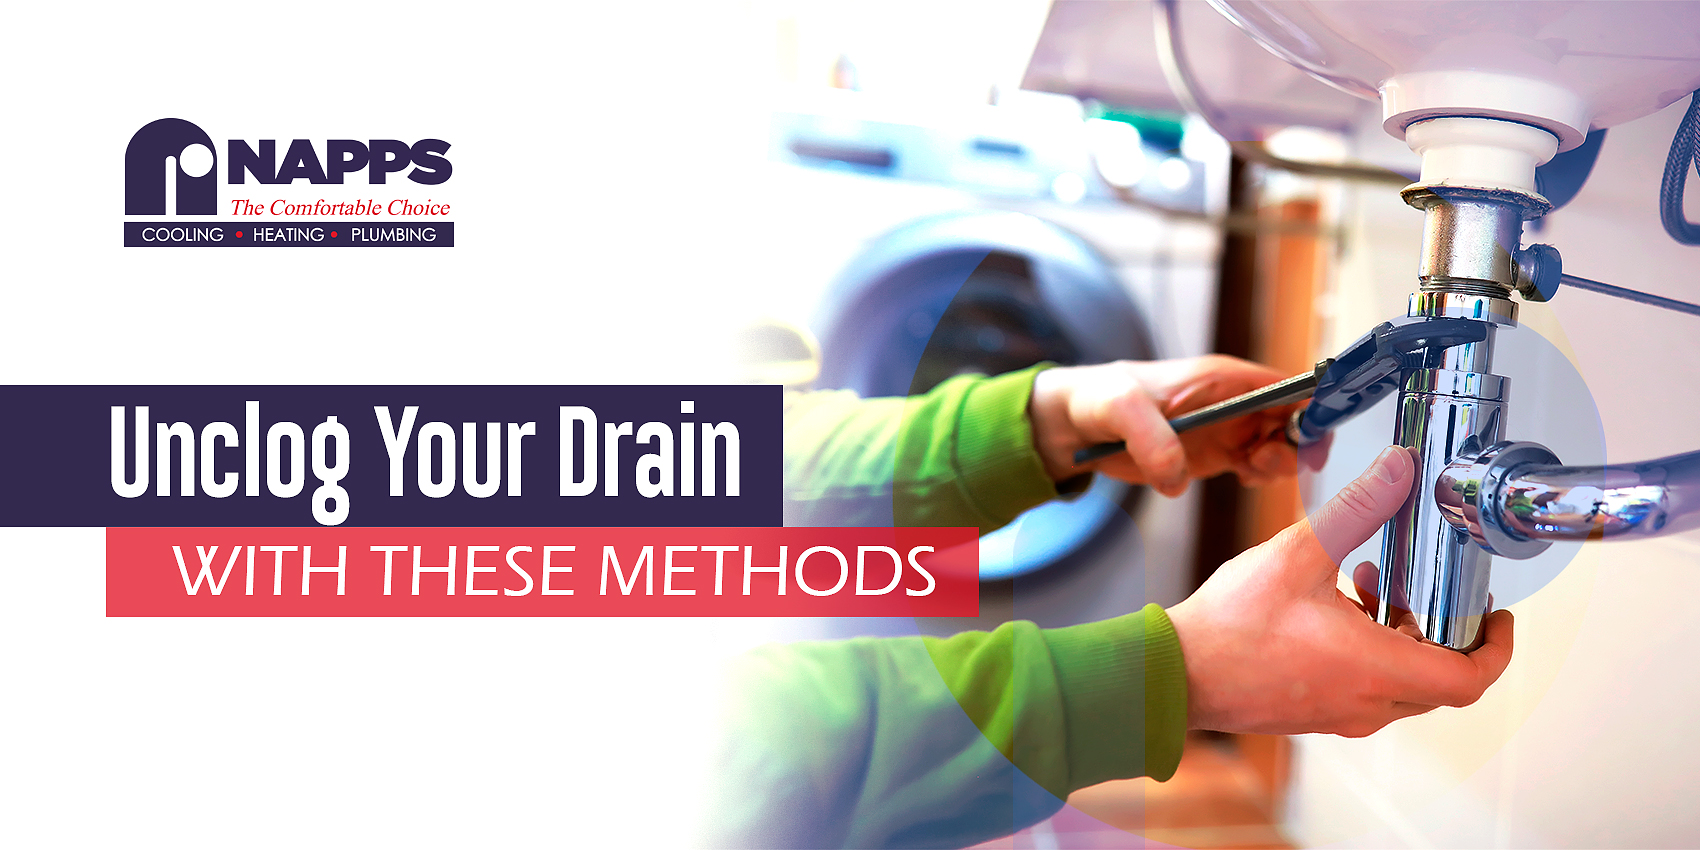  Unclog your drain with these methods 